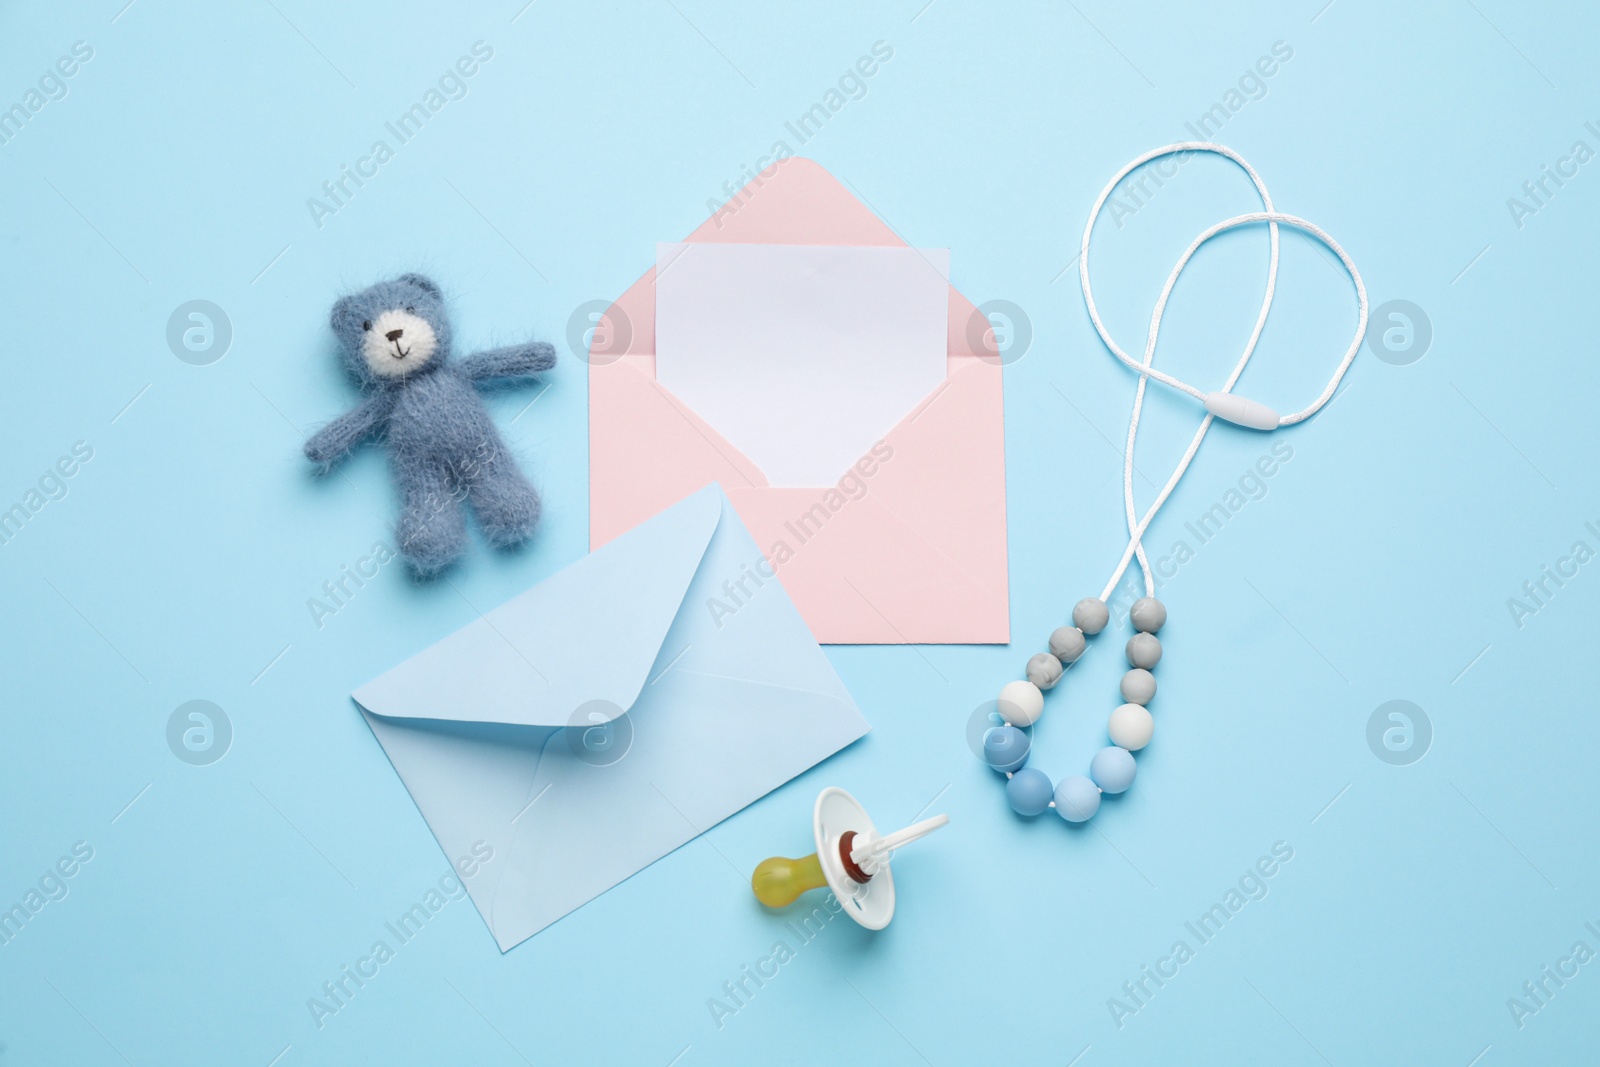 Photo of Envelopes for baby shower and accessories on turquoise background, flat lay